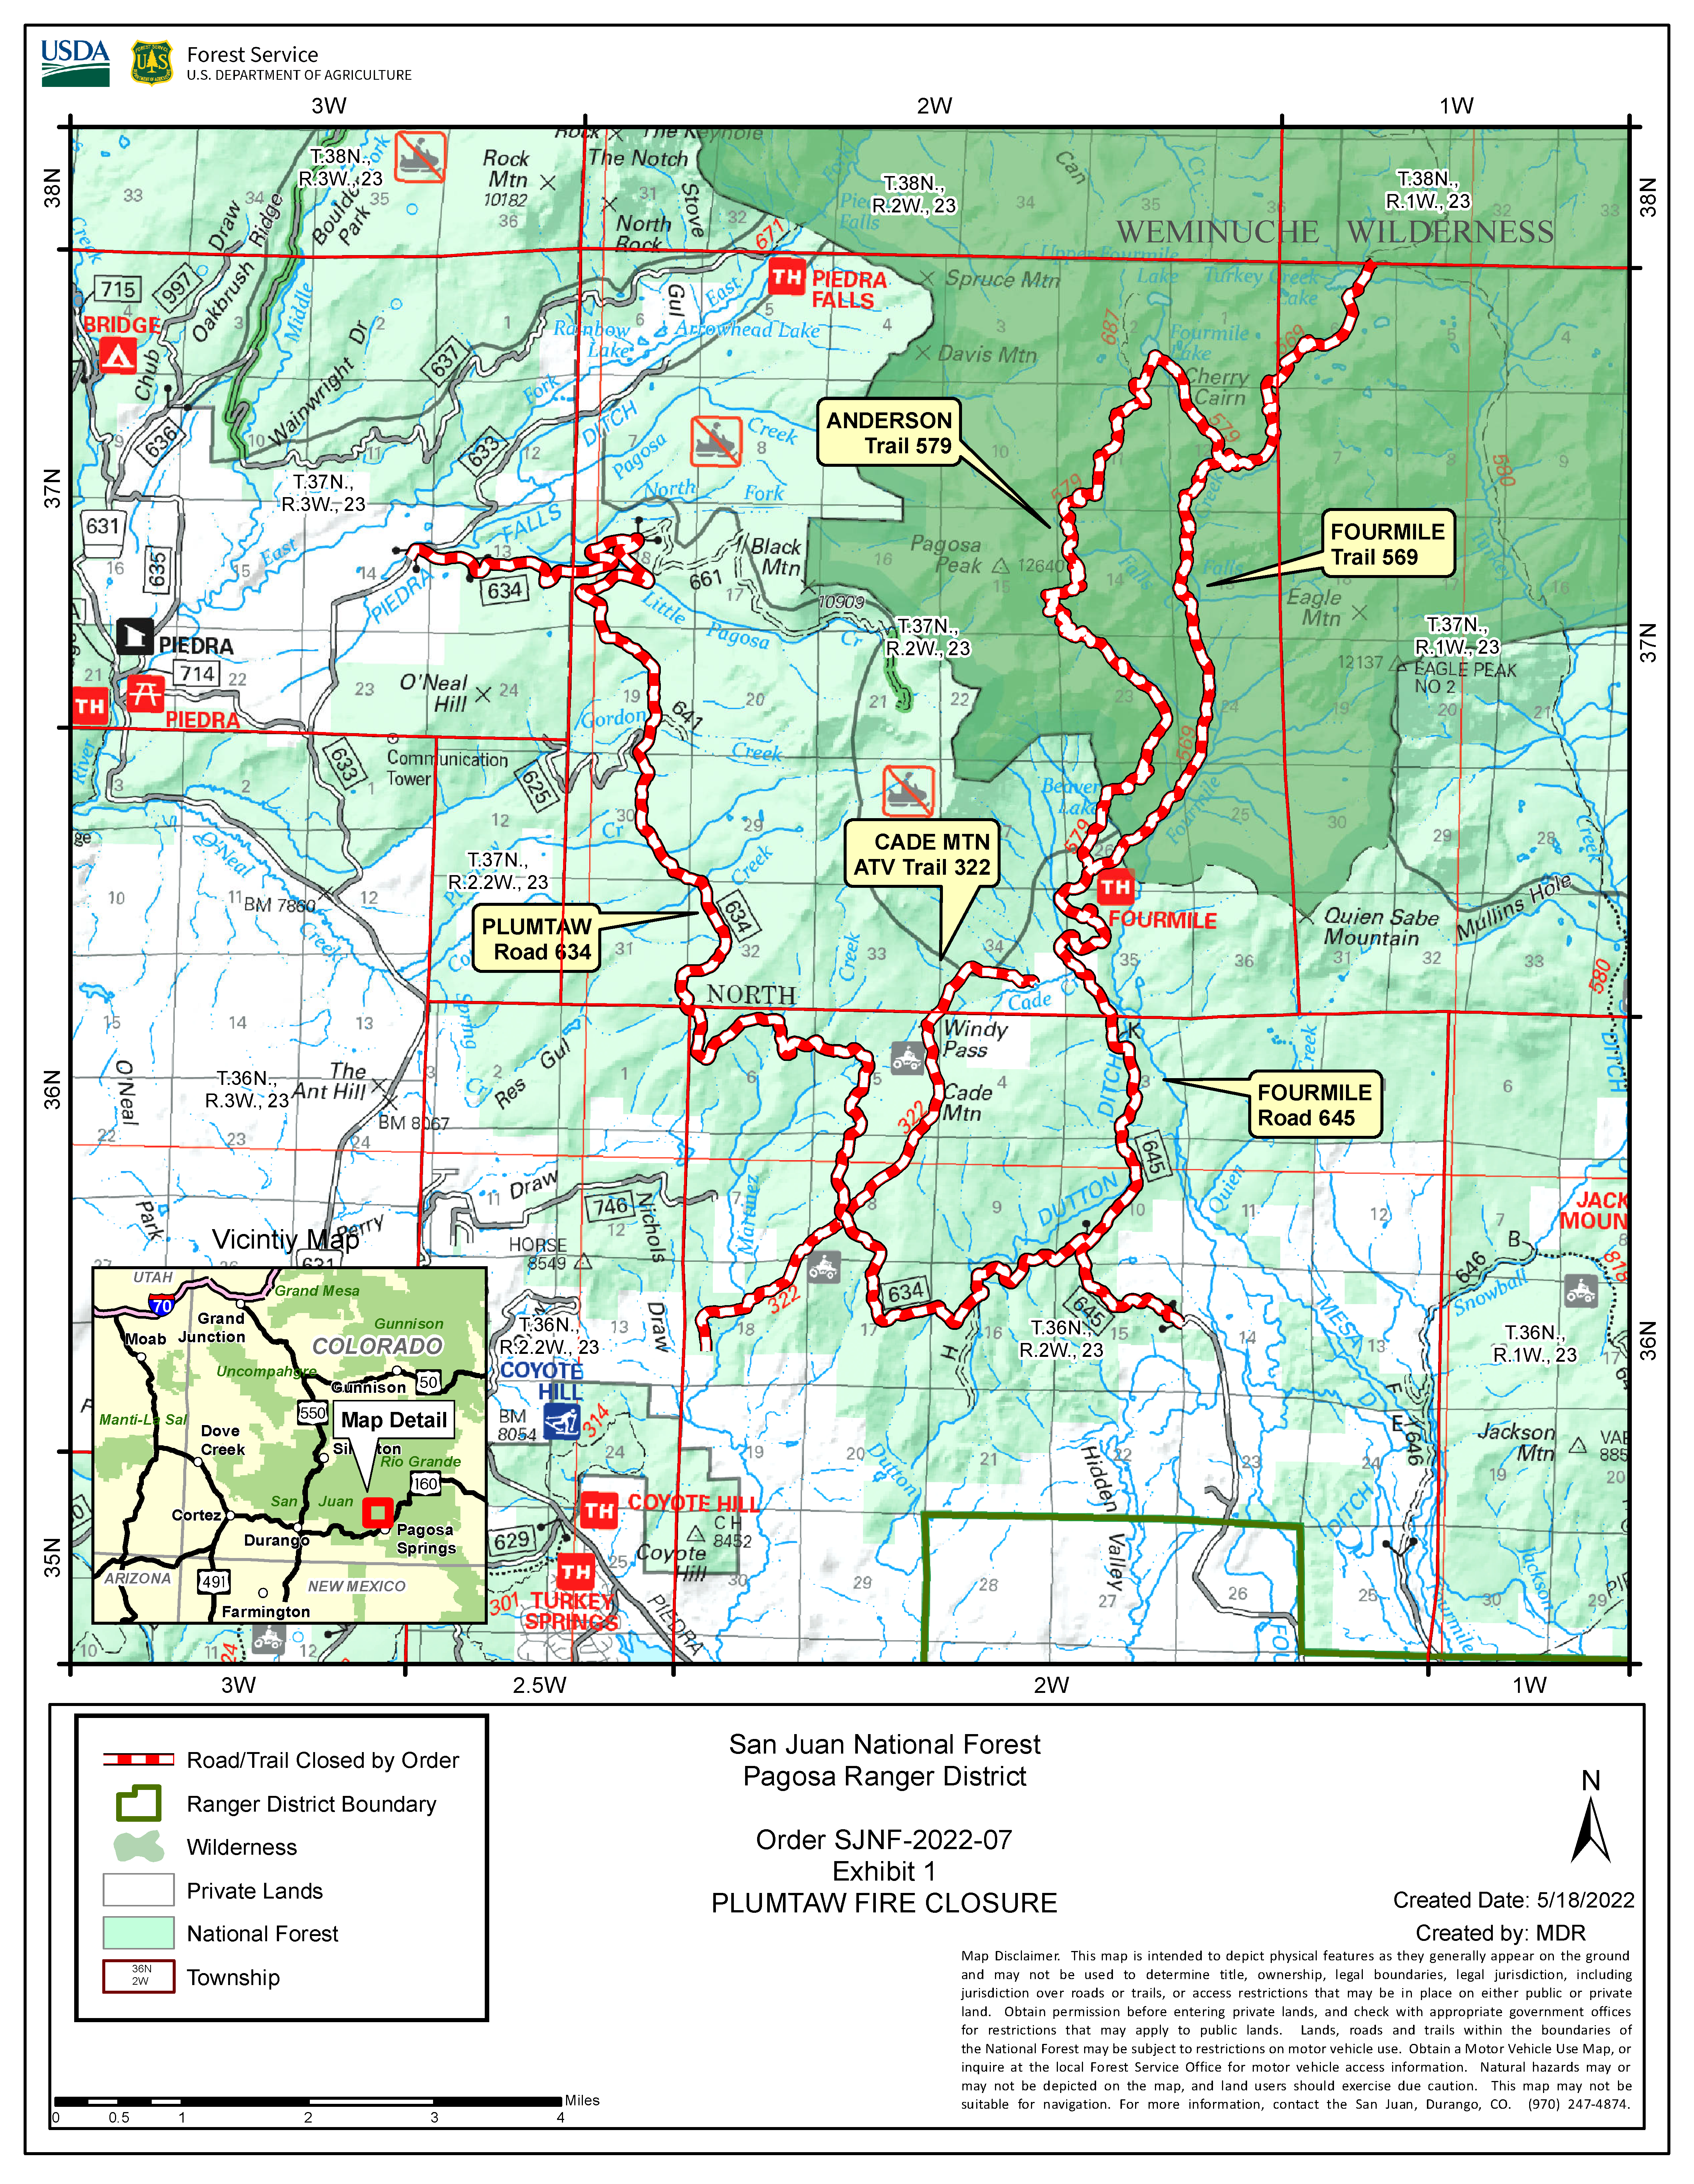 Map of Plumtaw Fire Closure Area